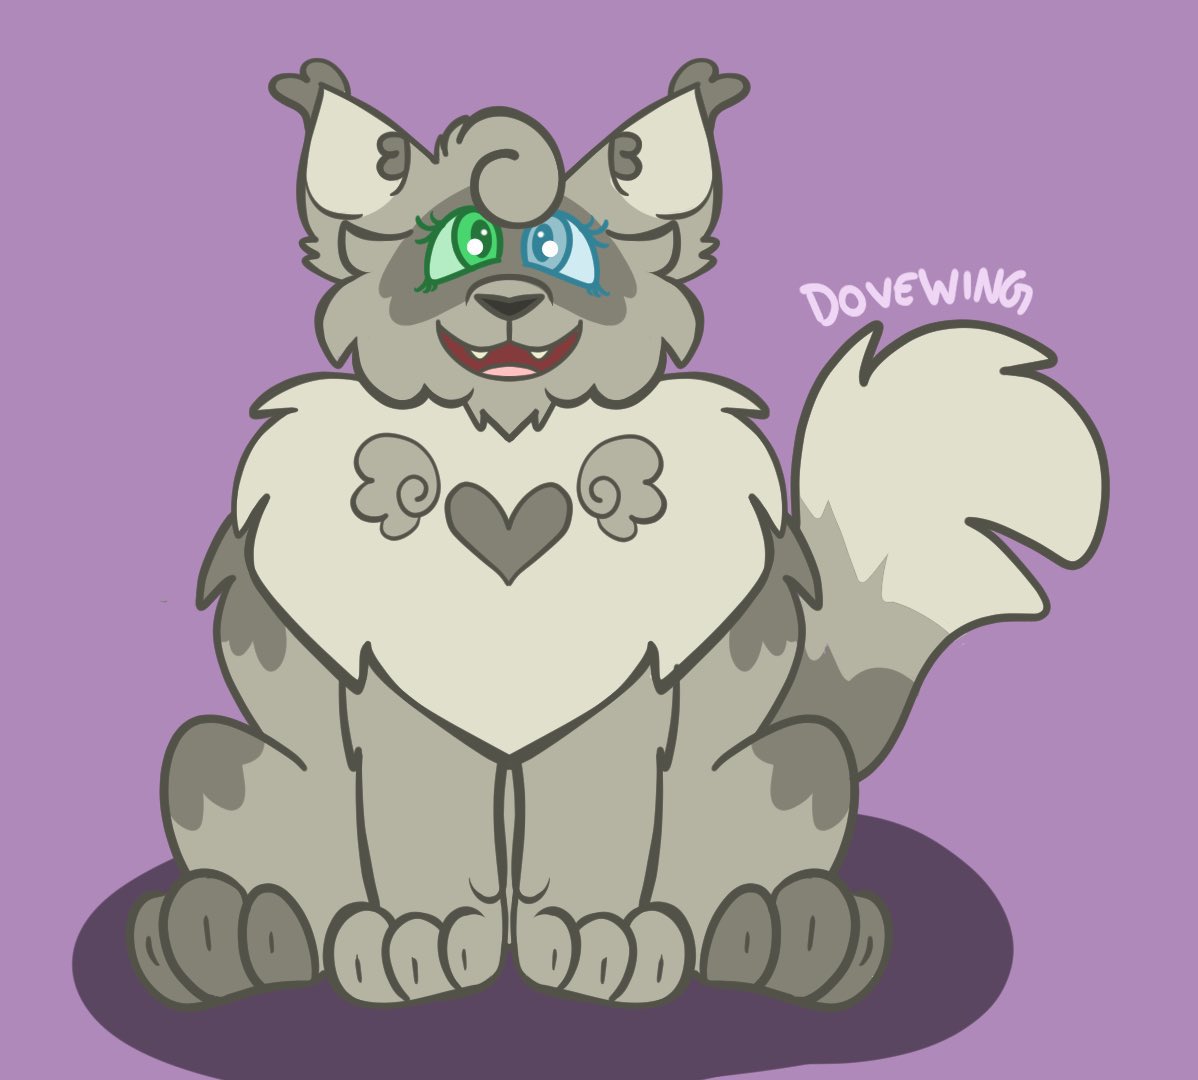 Chat do we approve of this dovewing design